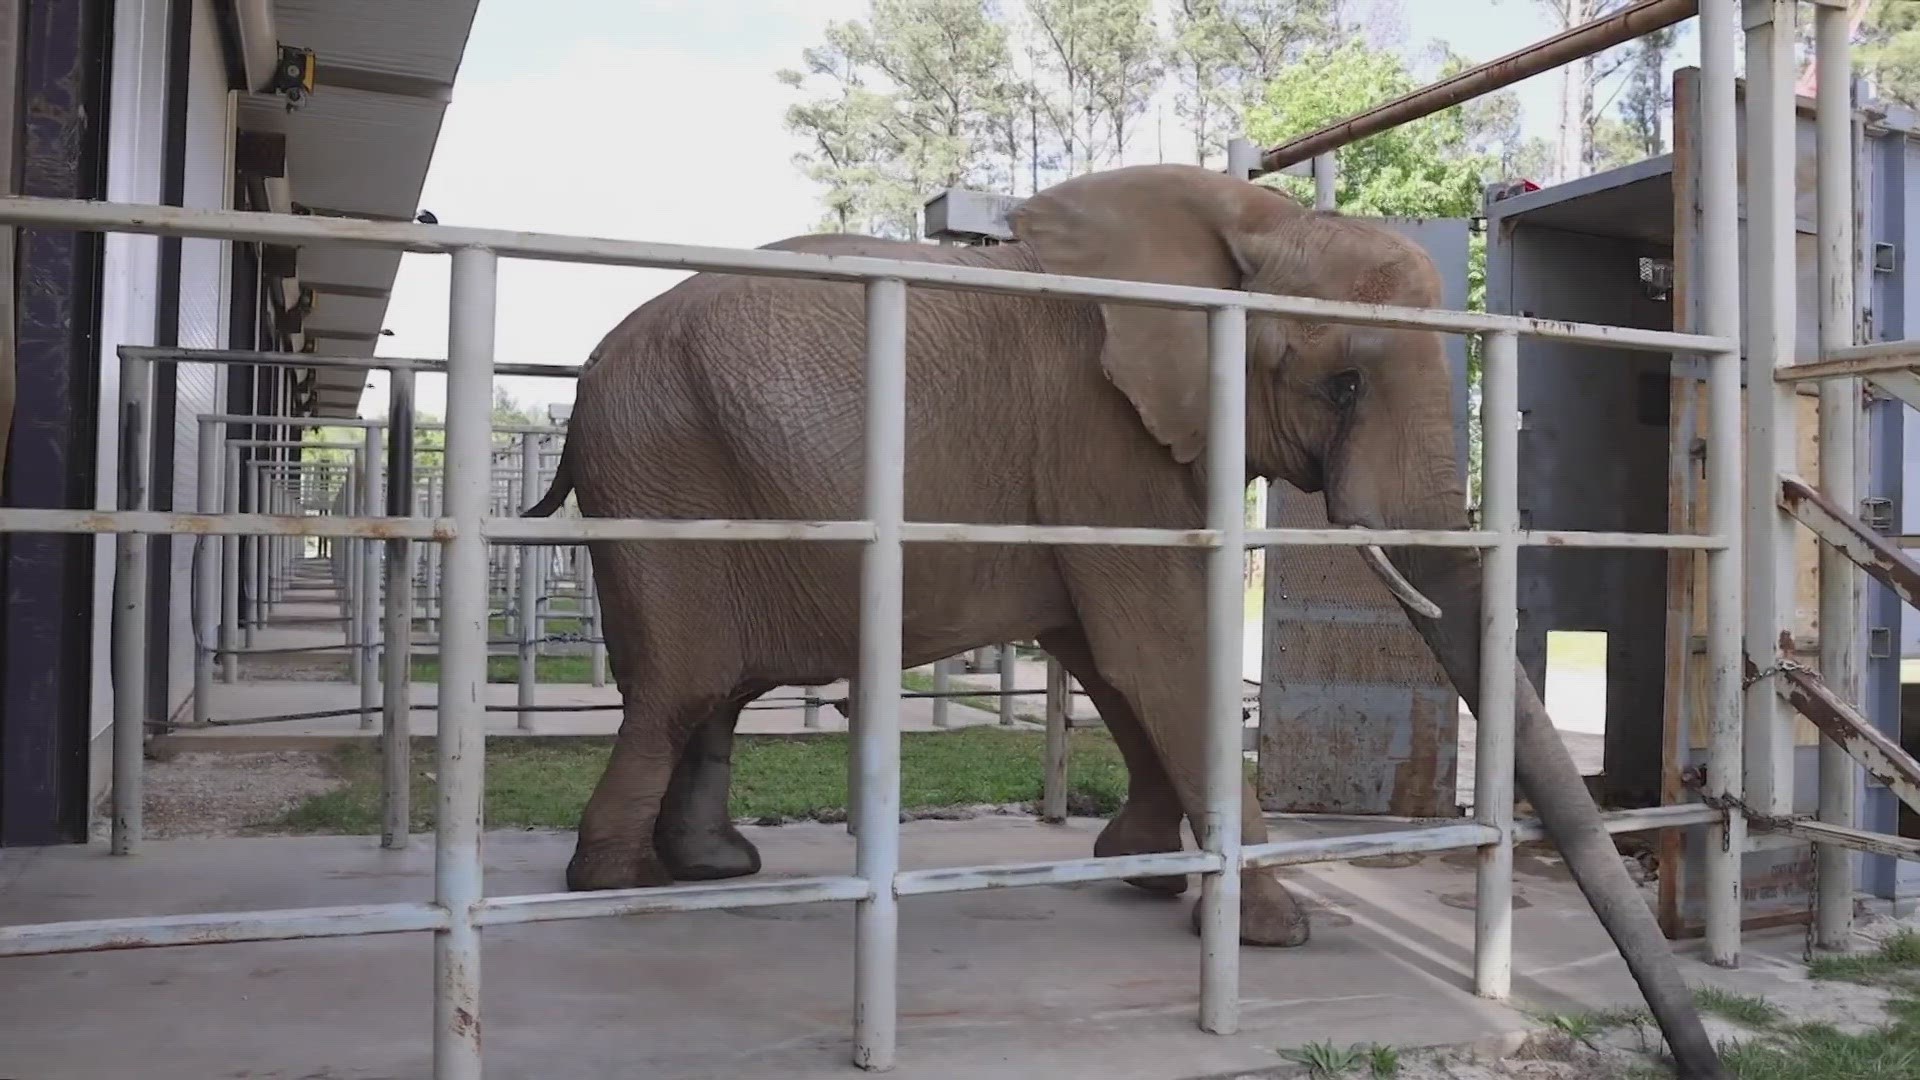 The Elephant Sanctuary is located in Hohenwald and is part of Jana's care plan to make sure she has companionship for the rest of her life.